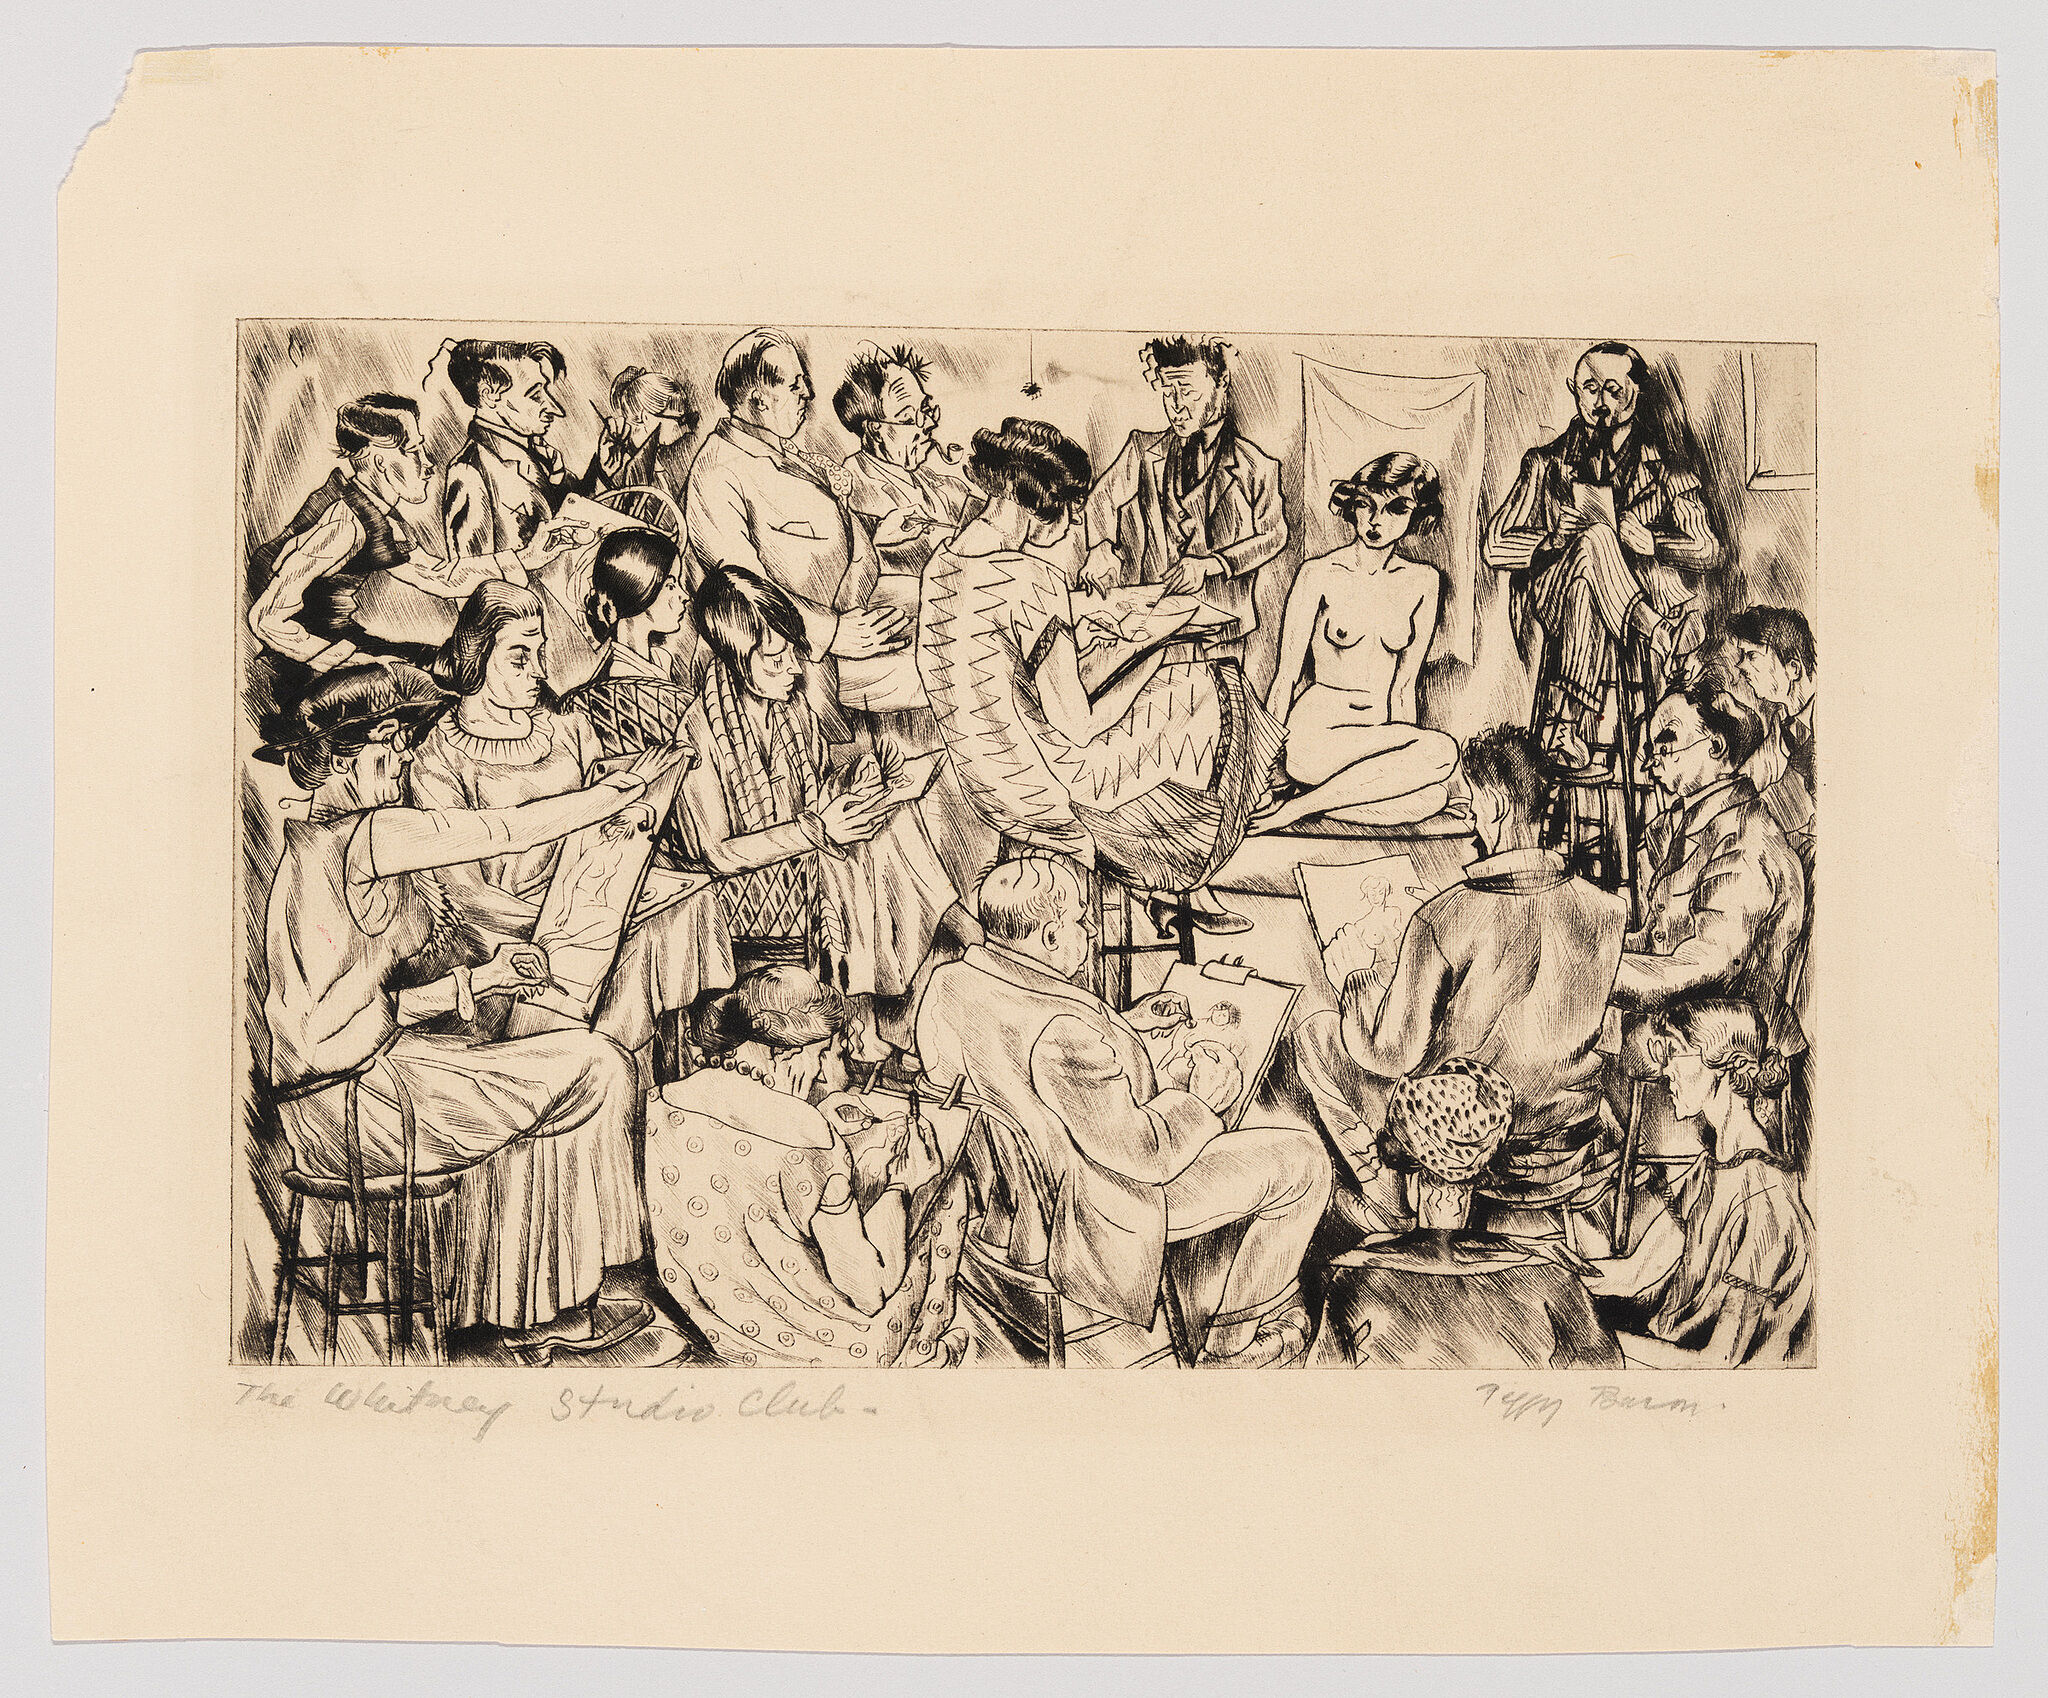 A drawing depicting a sketch class from the 1920s at the Whitney Studio Club.